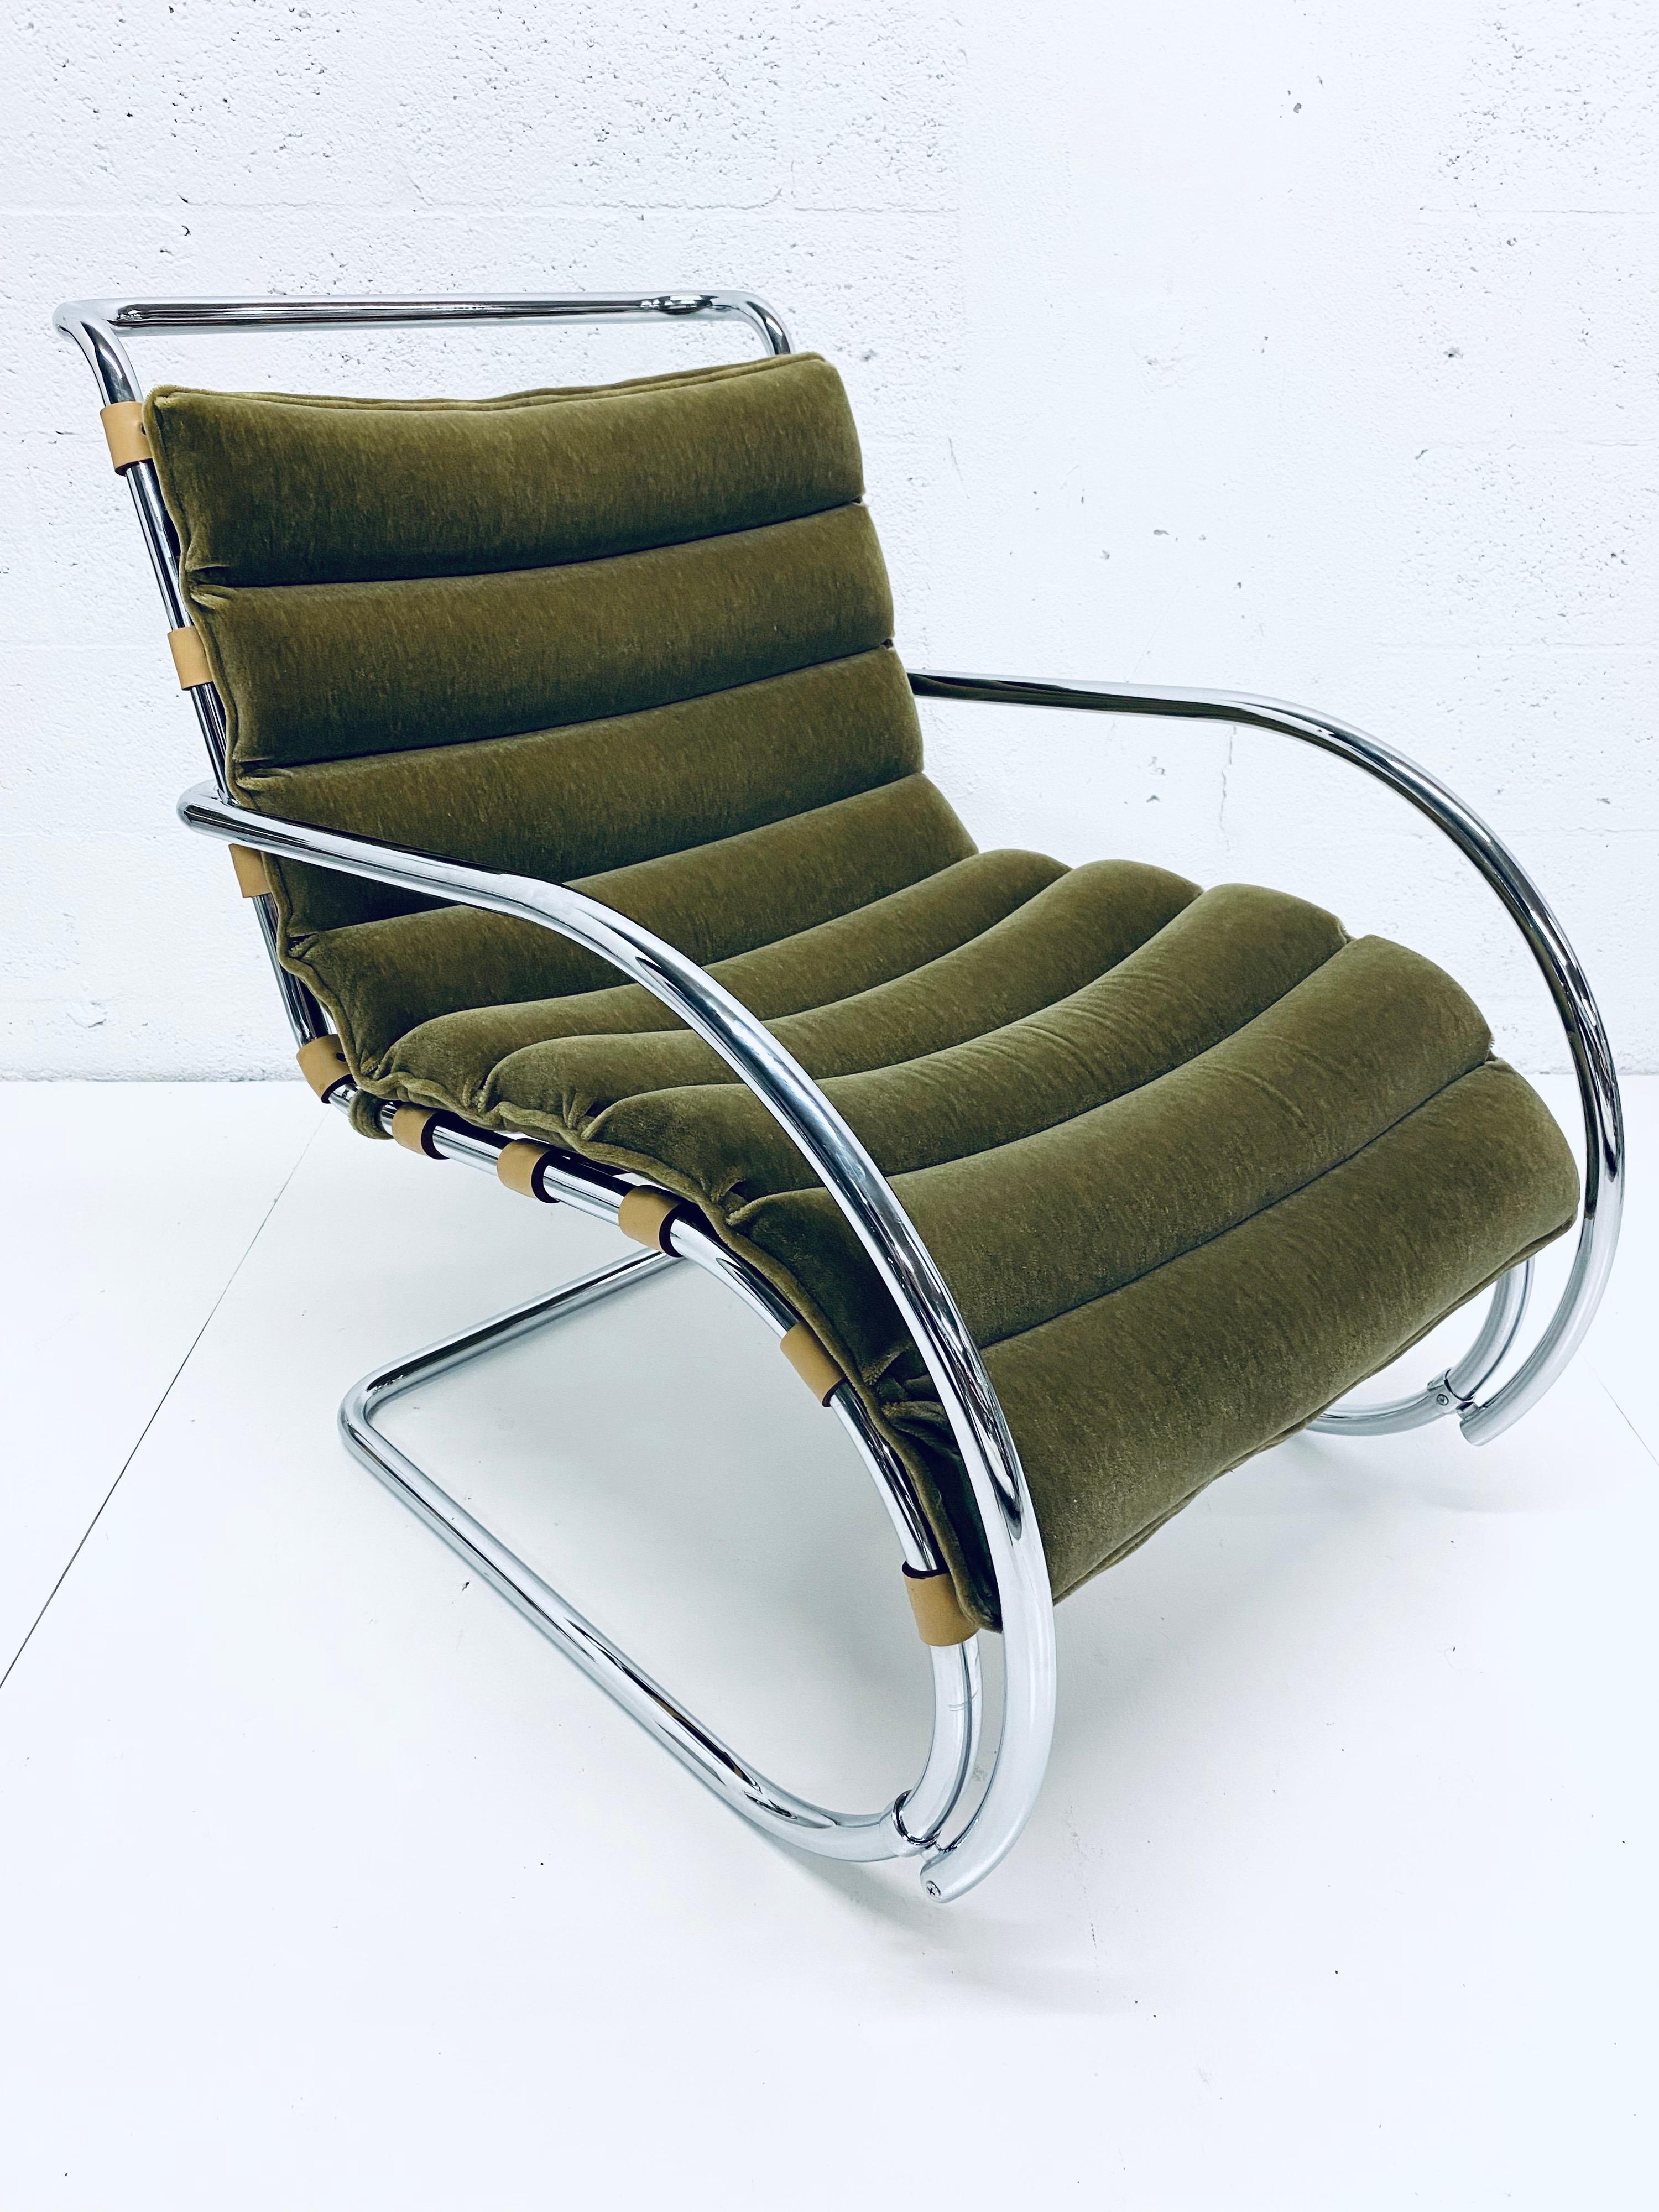 Authentic MVR lounge chairs with olive green channel tufted mohair fabric over leather support straps and a tubular chrome frame designed by Ludwig Mies van der Rohe and produced by Gordon International. Manufactured in Italy, 1970s. 

Sold